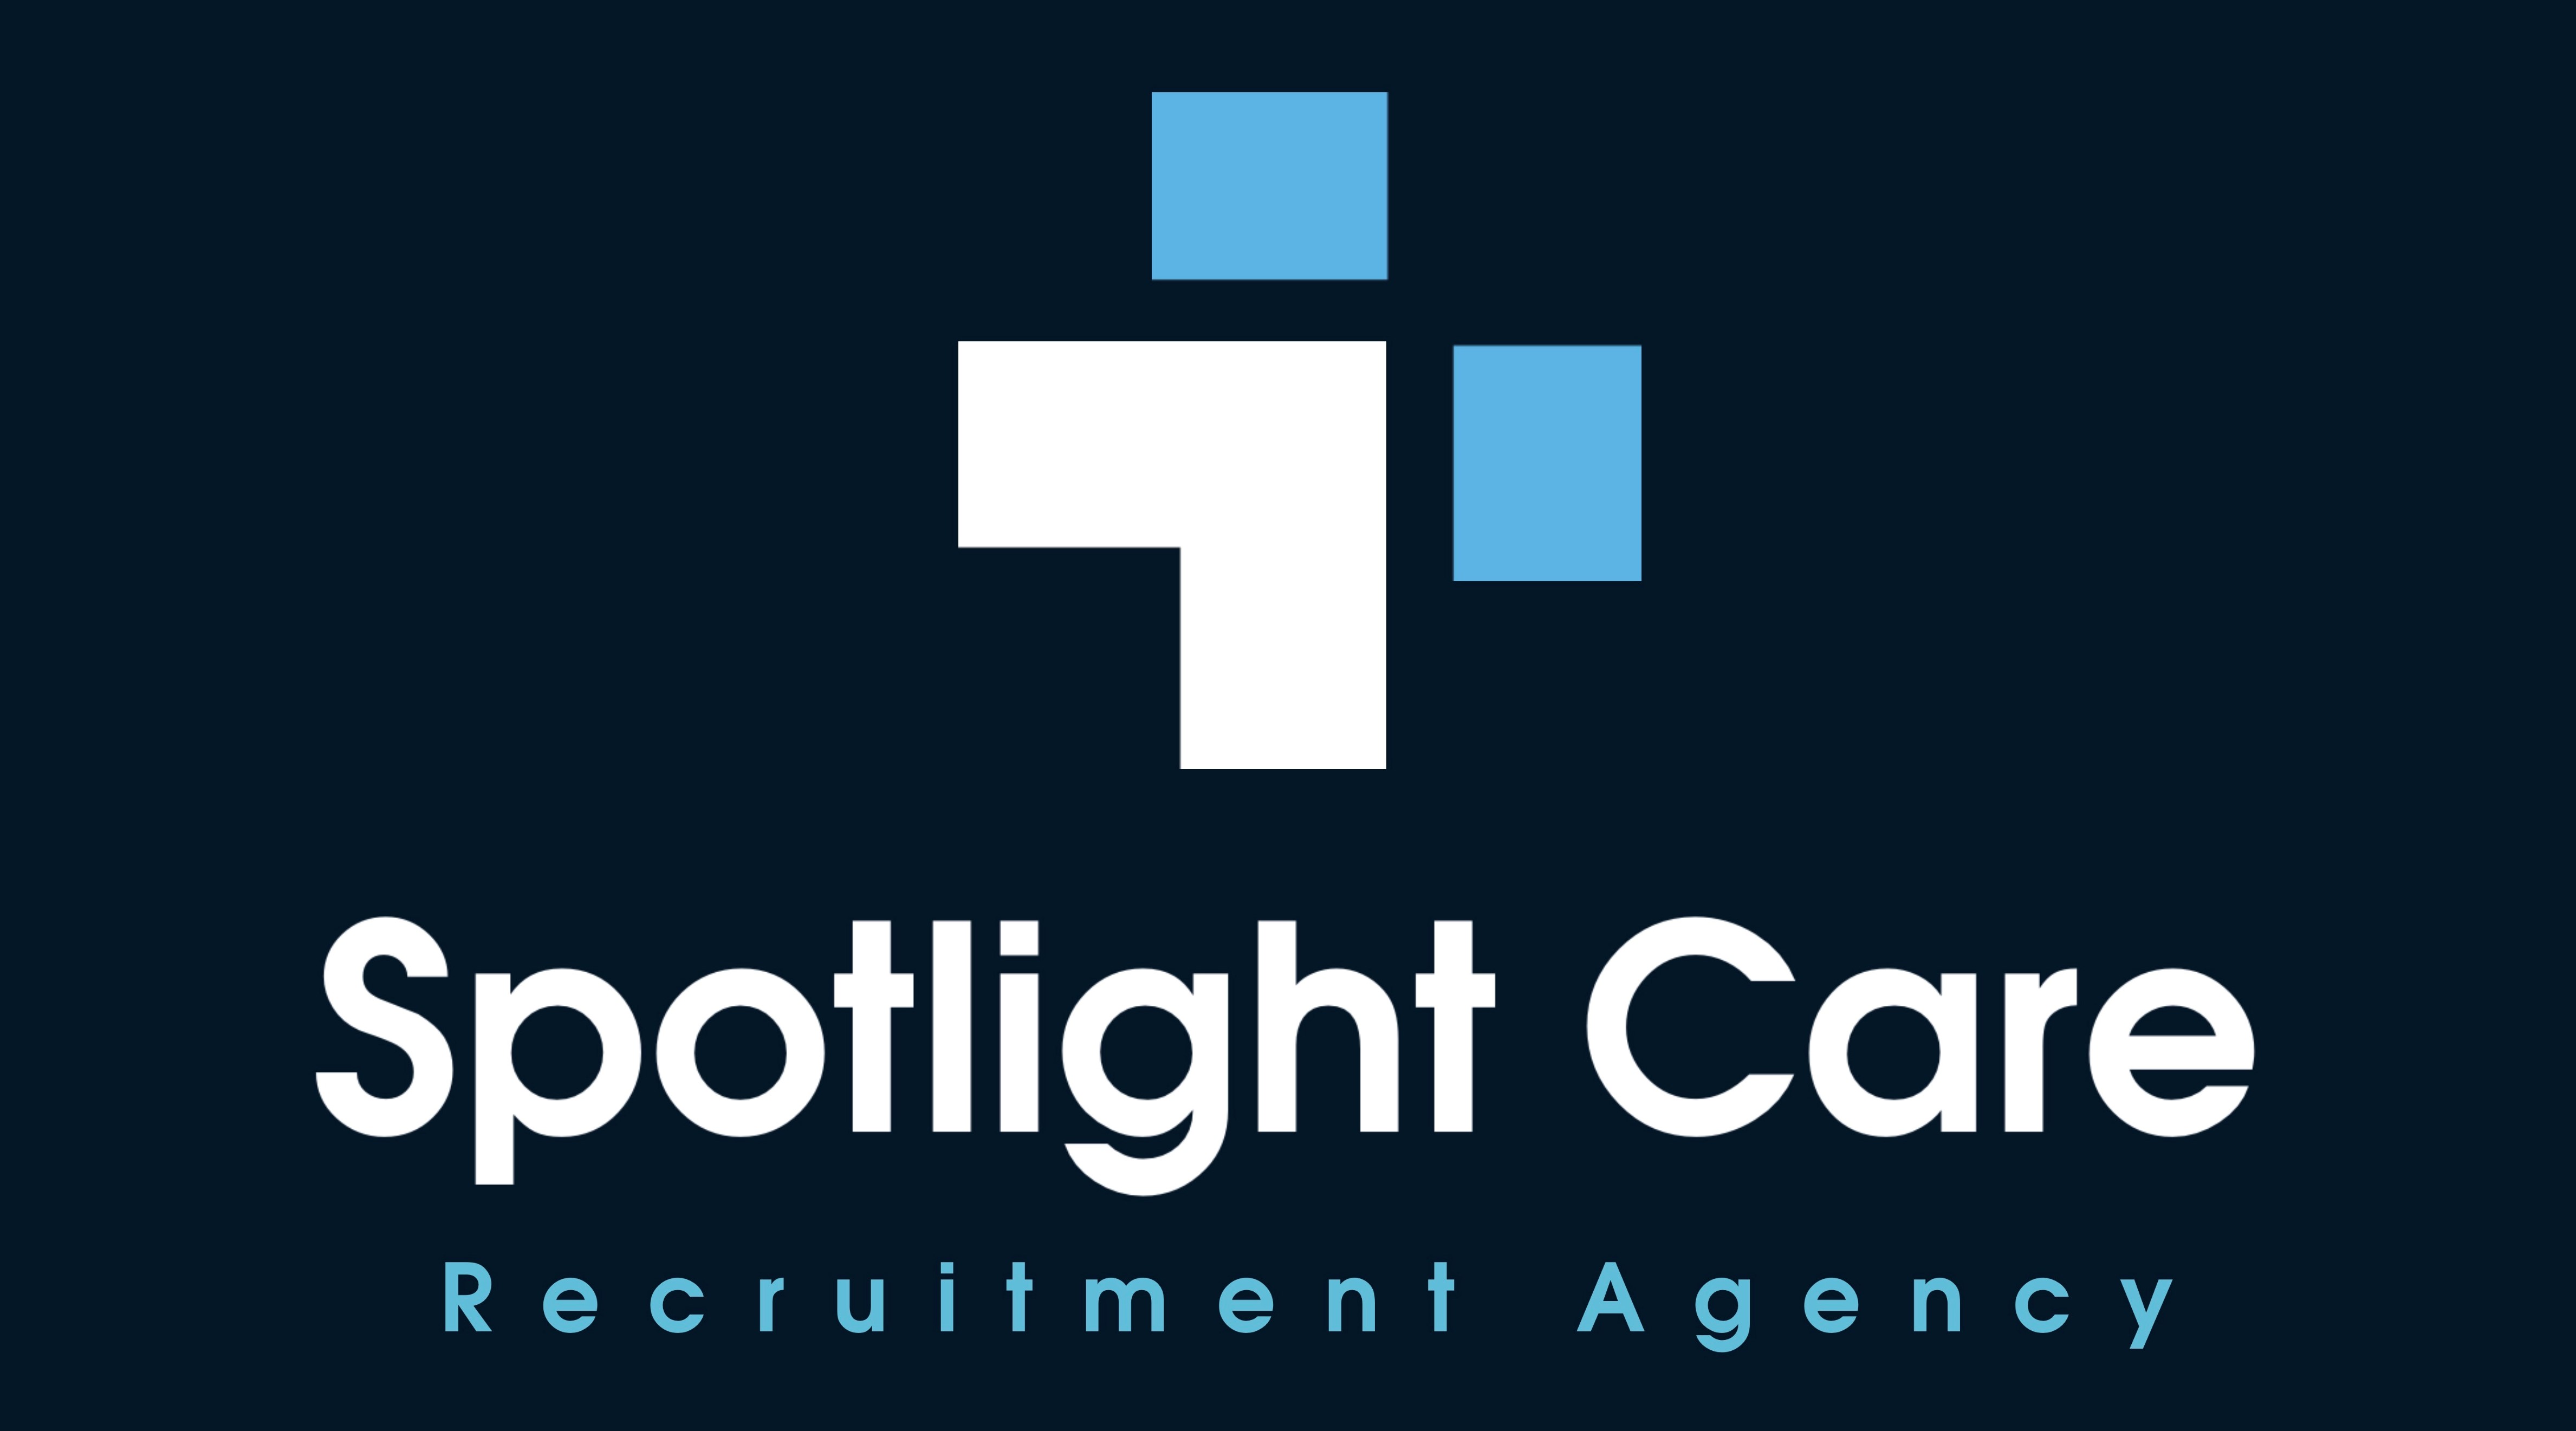 Healthcare Recruitment Agency, Care Agency